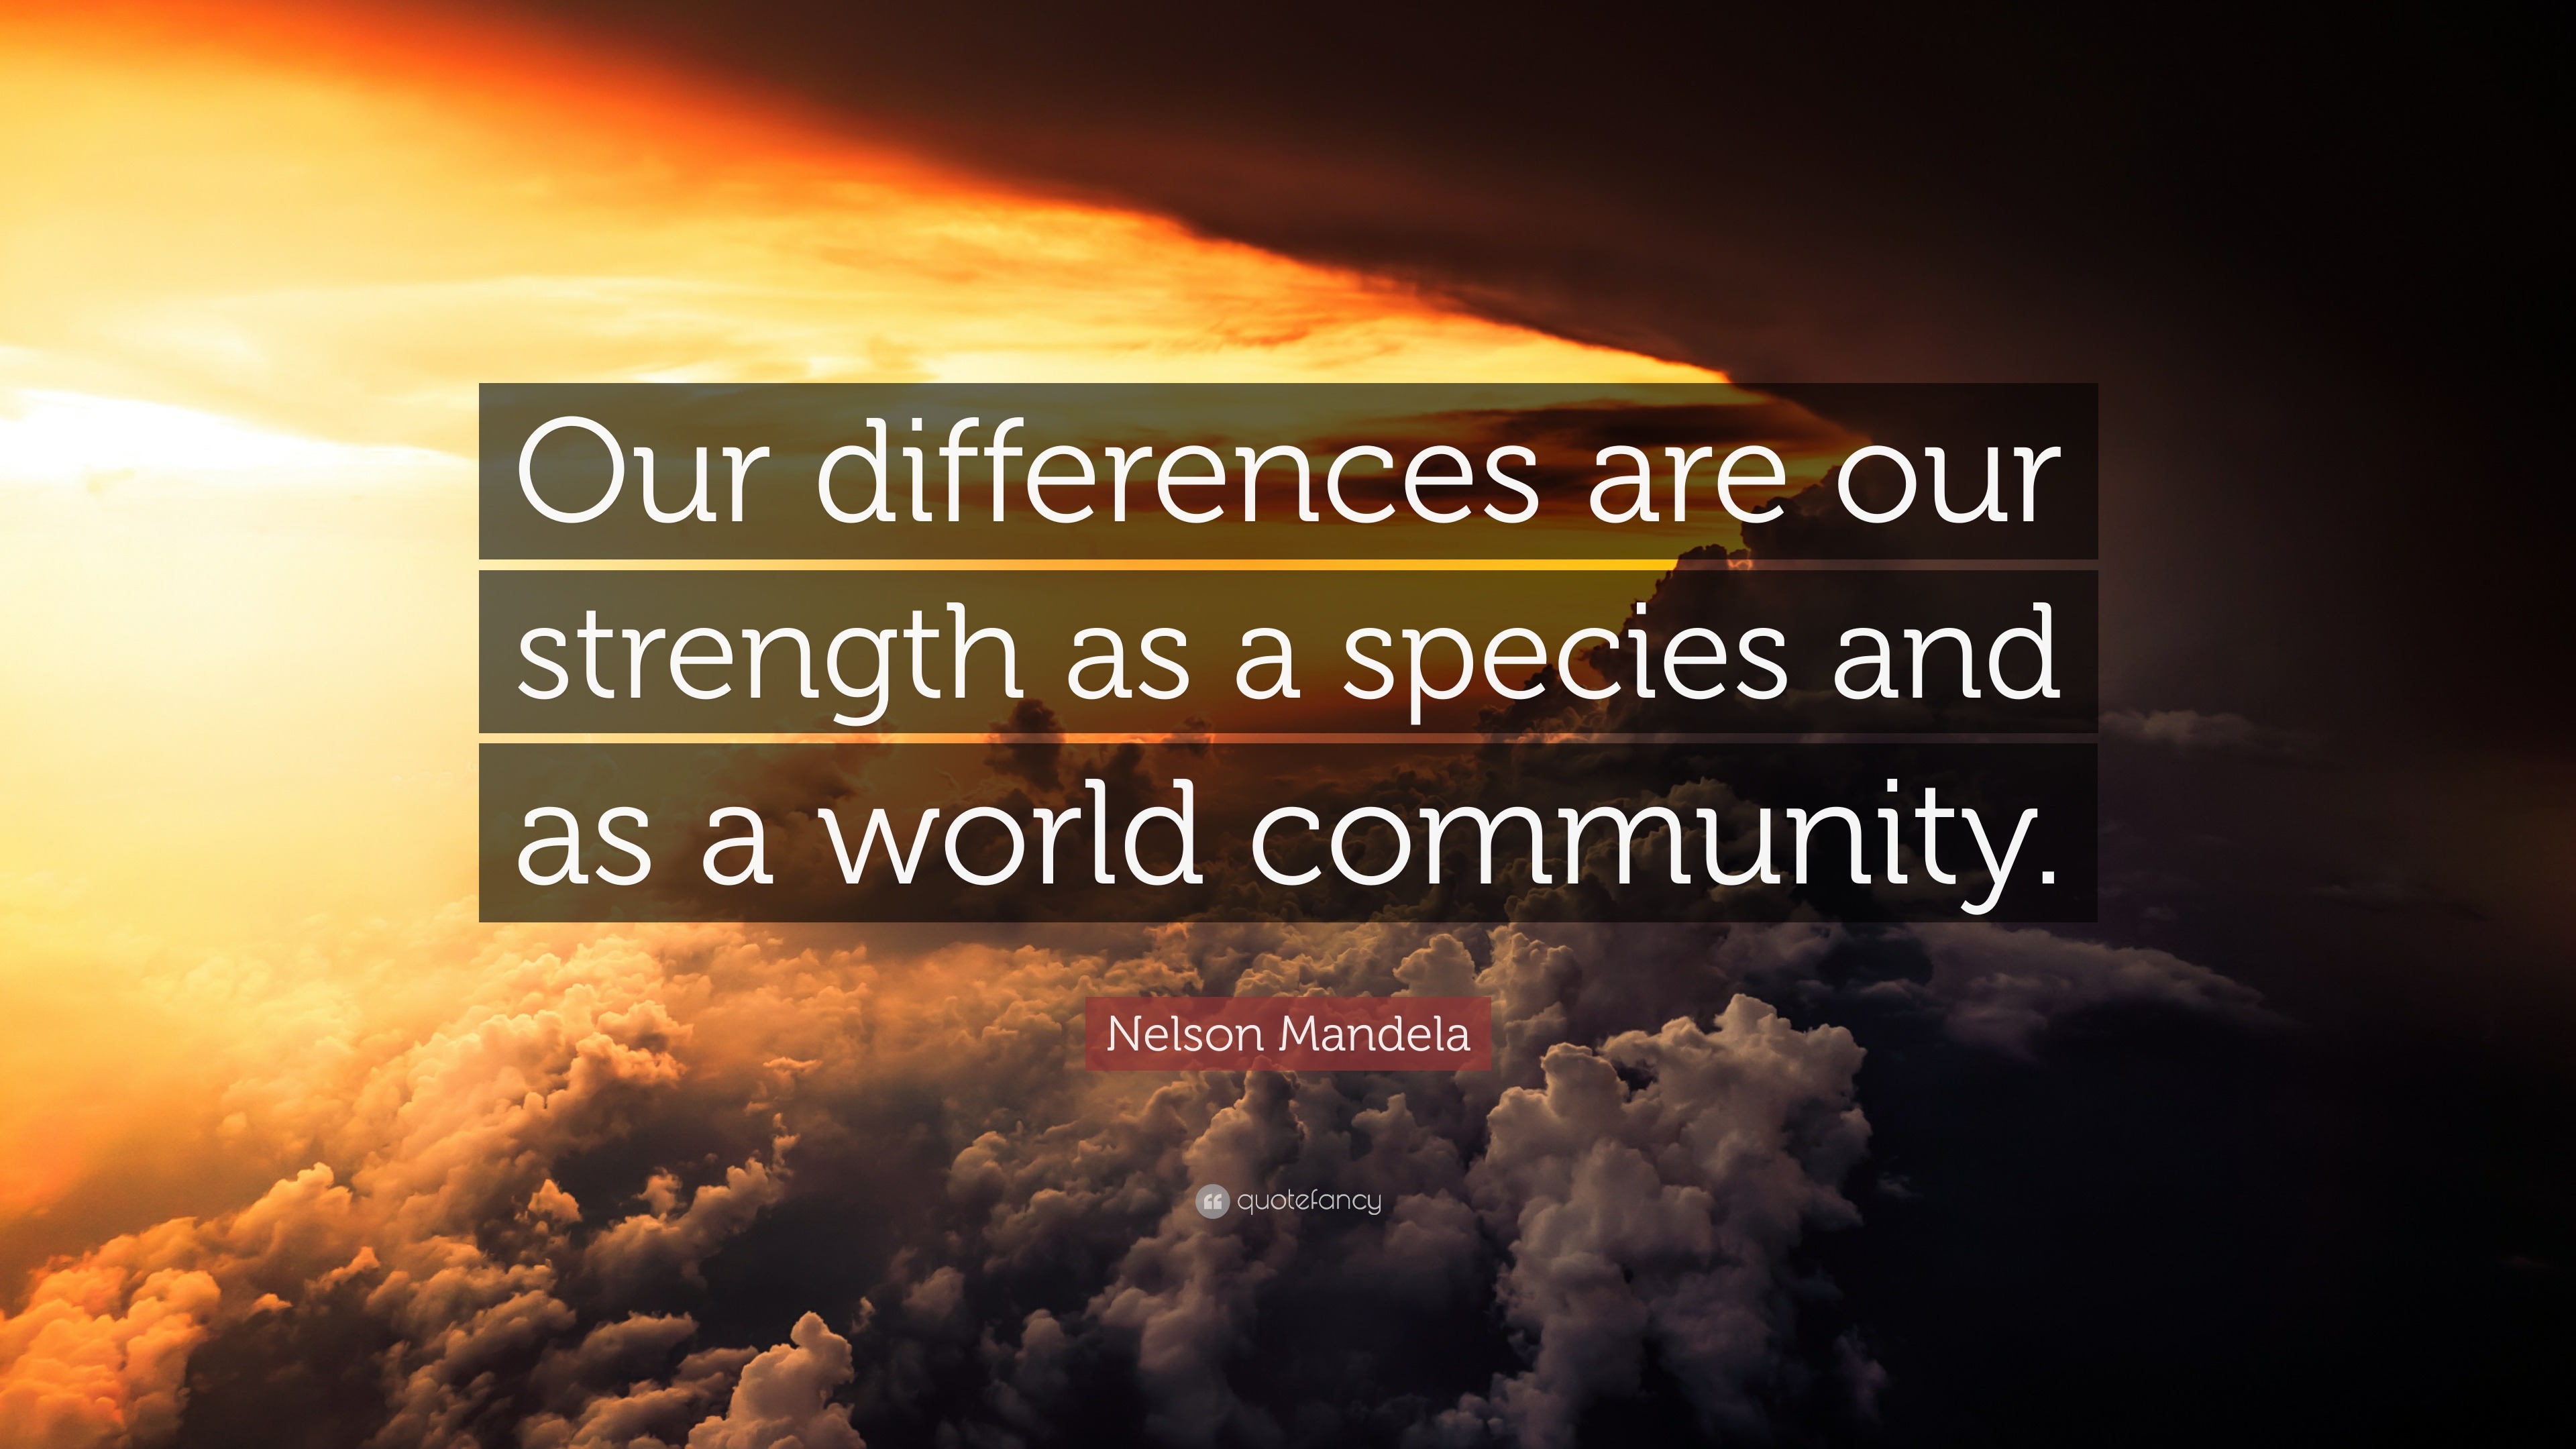 Nelson Mandela Quote: “Our differences are our strength as a species